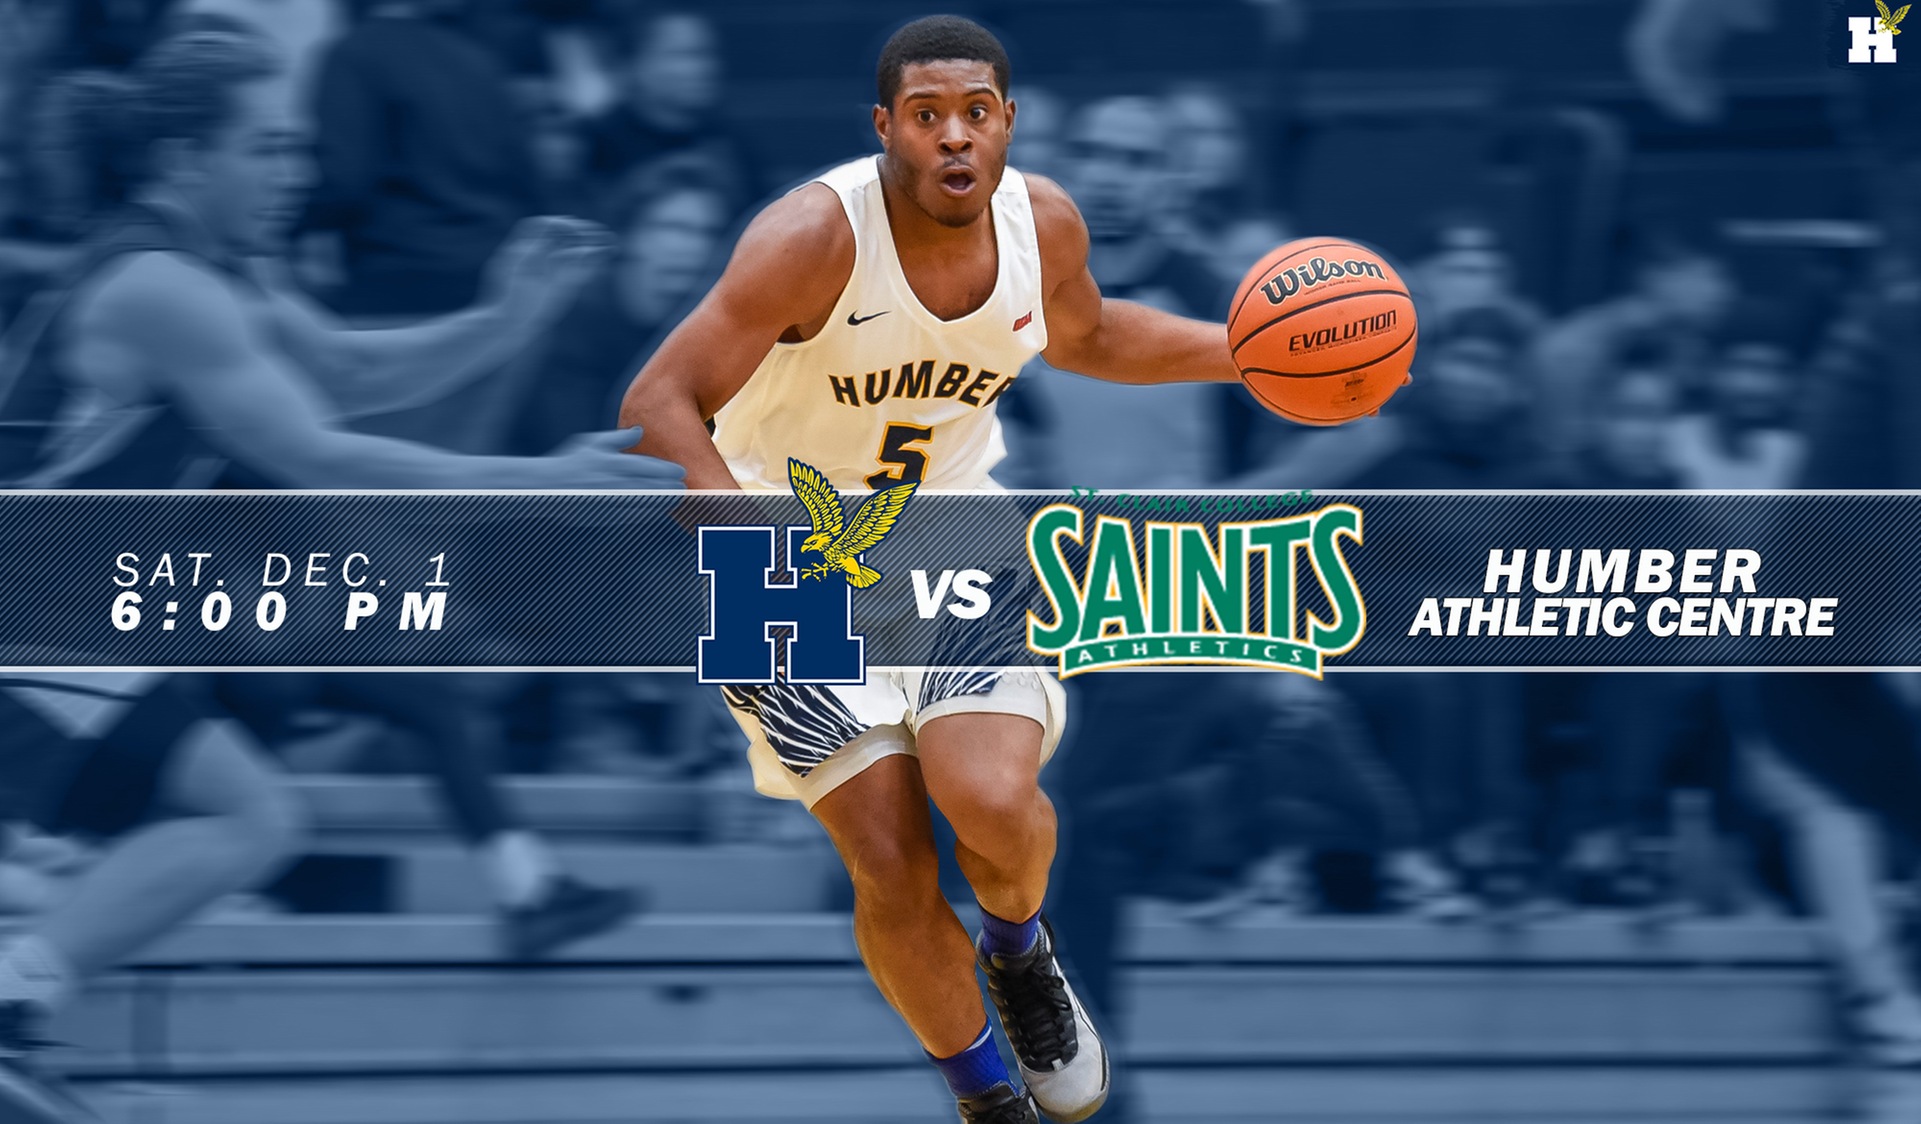 FIRST-HALF CONCLUDES SATURDAY FOR No. 3 MEN'S BASKETBALL